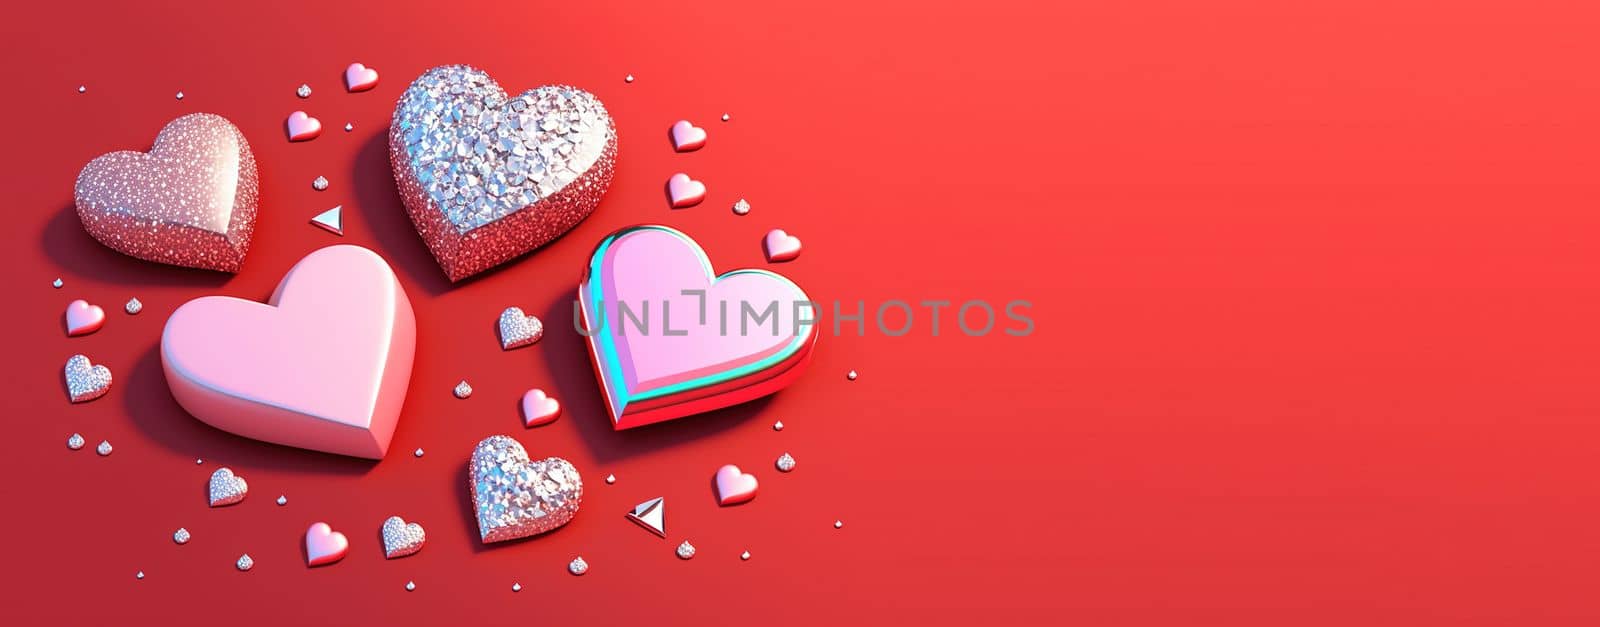 Valentine's Day Heart Objects and Crystal Diamonds Background by templator